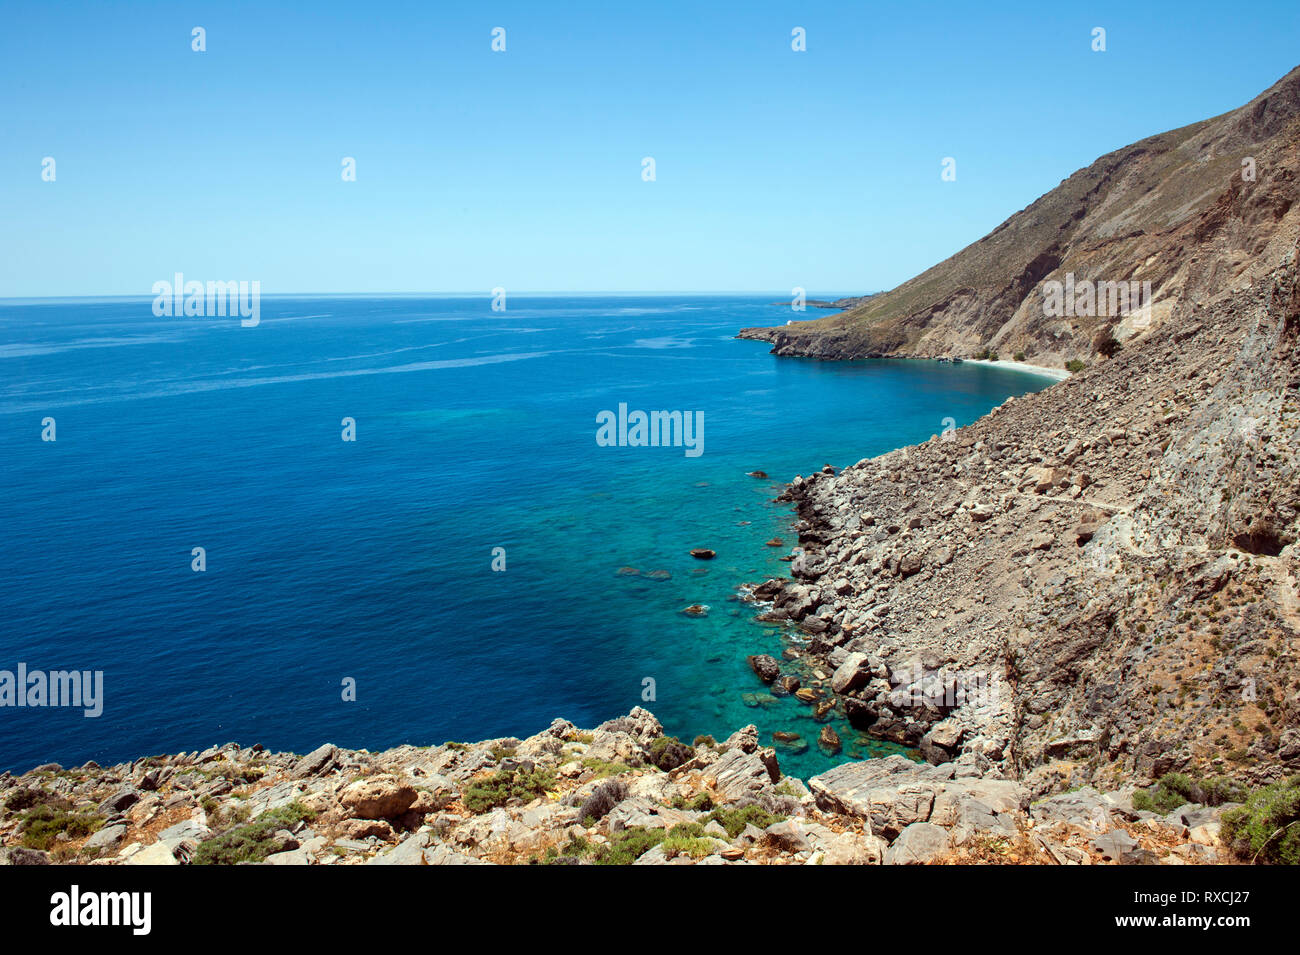 View of the southern coast of Crete between the villages of Hora Sfakion and Loutro with secluded Sweetwater Beach in the distance. Stock Photo